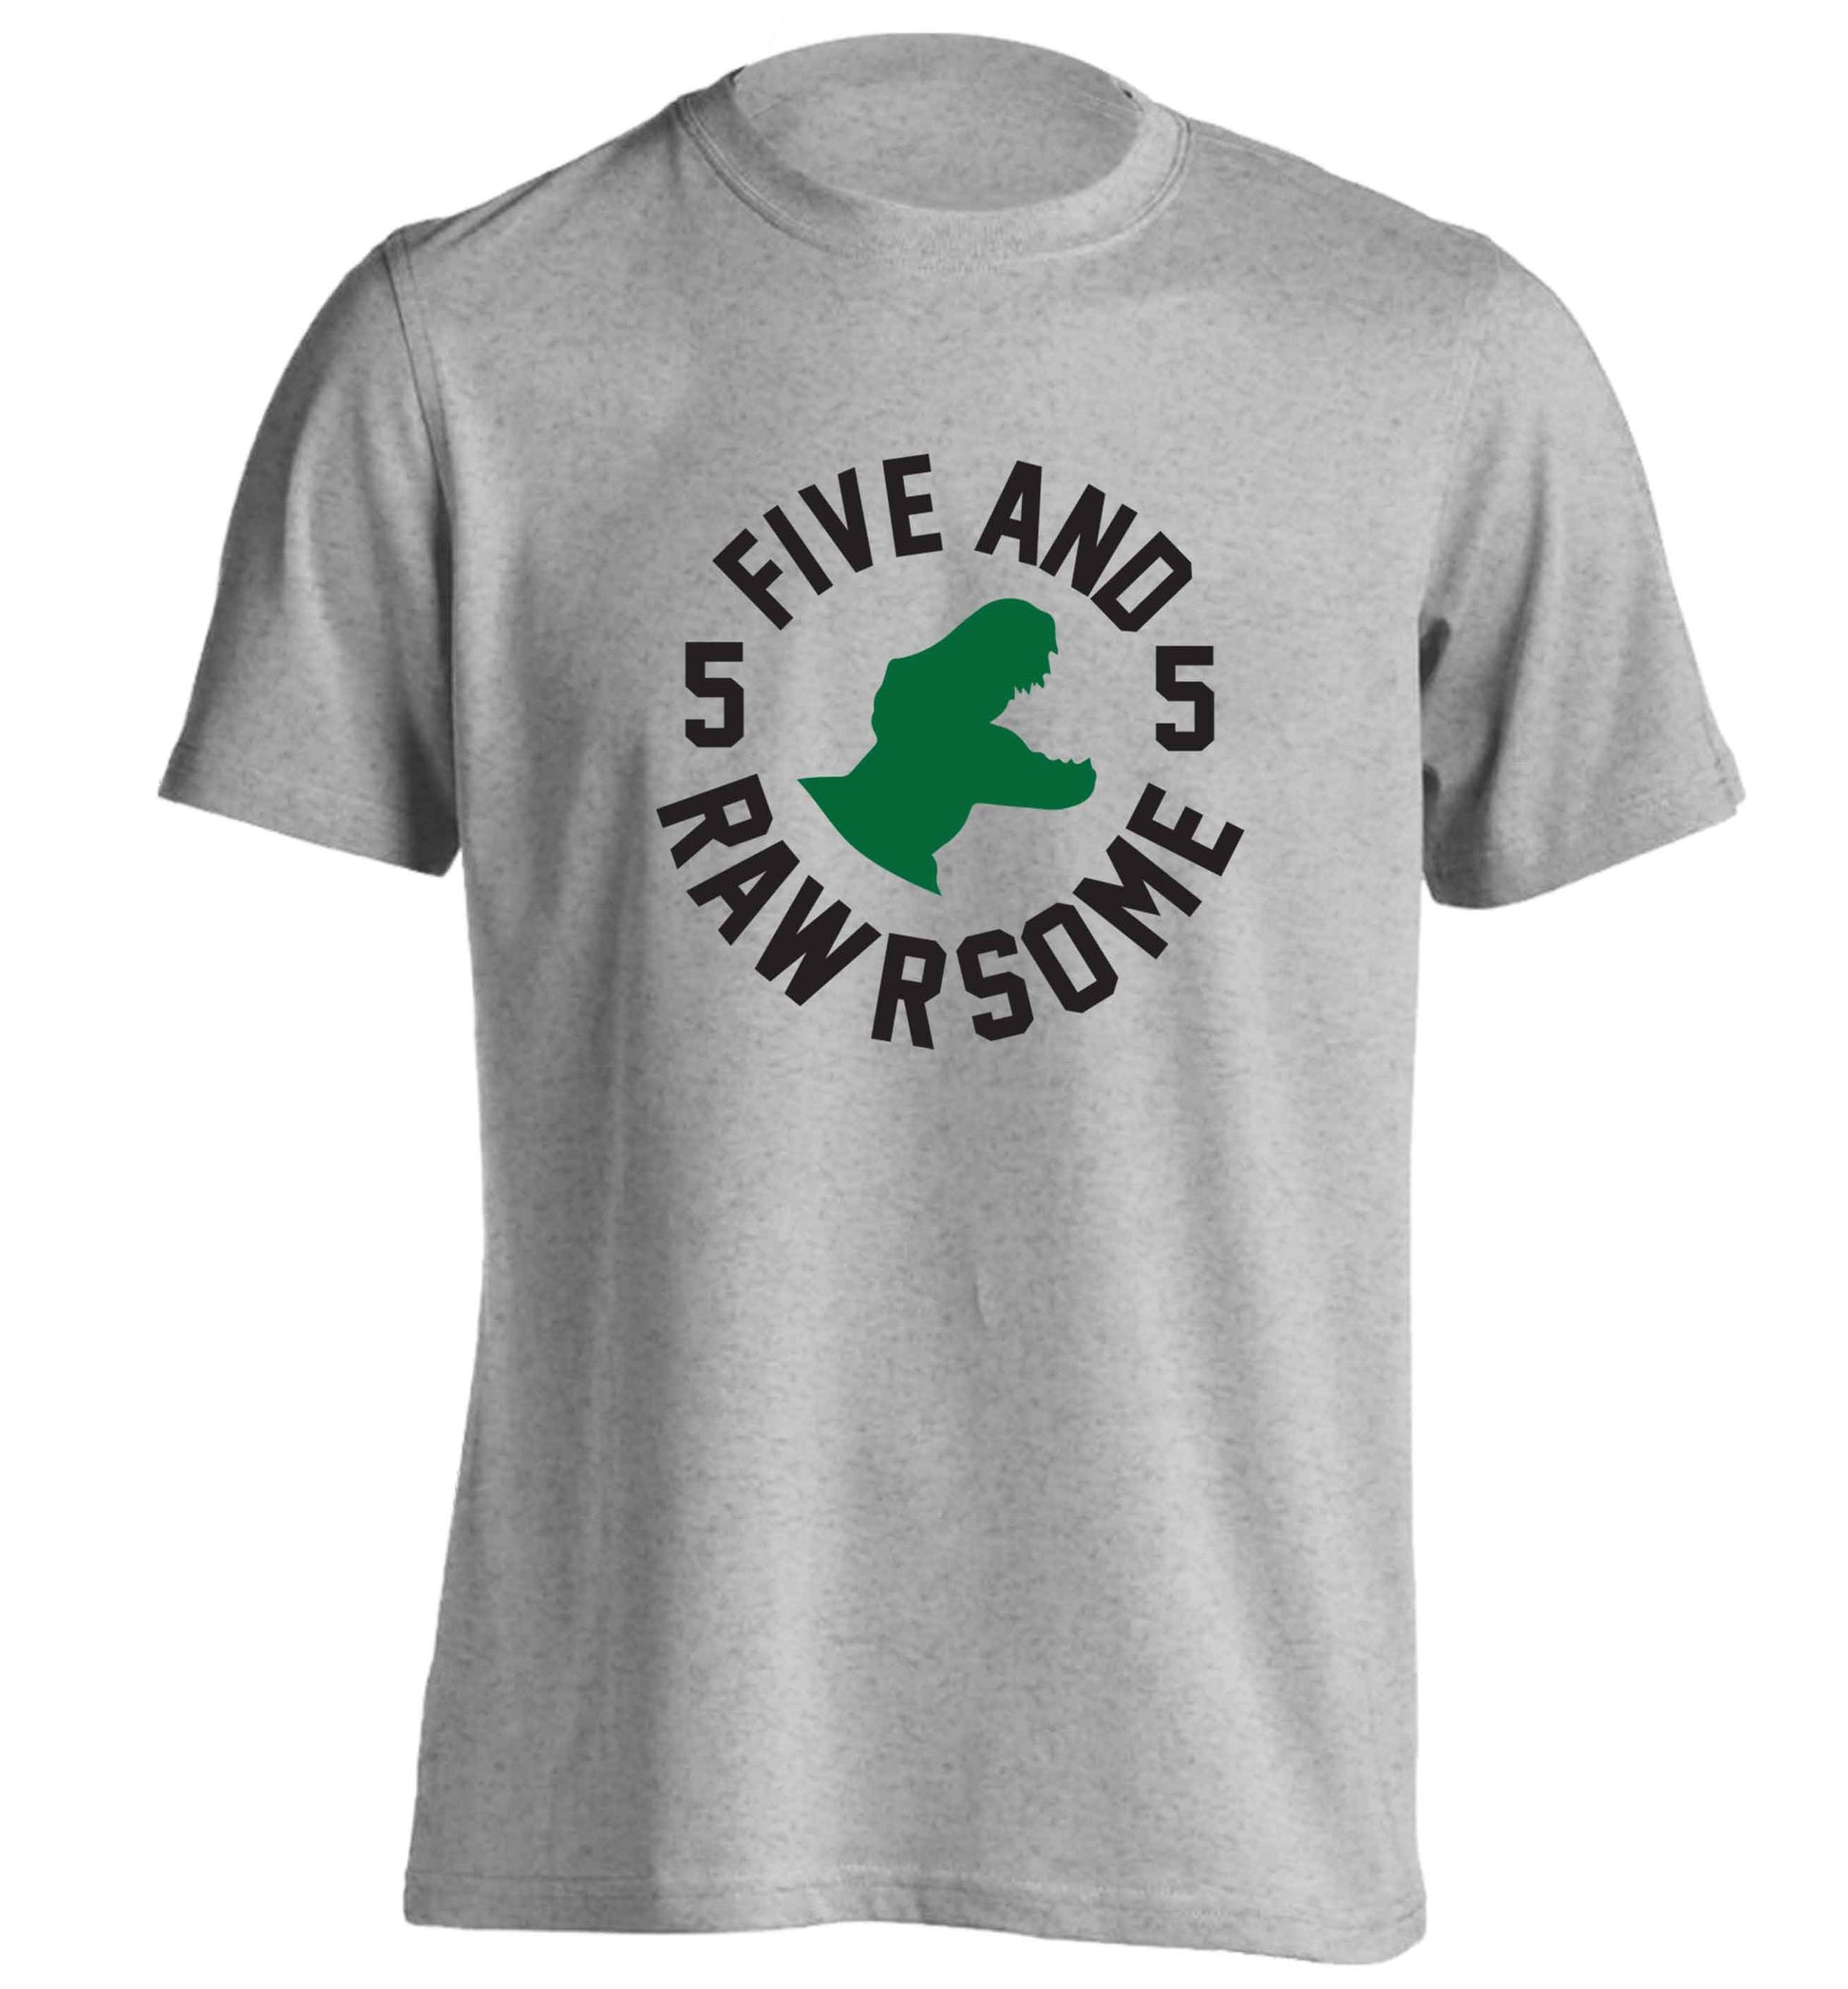 Five and rawrsome adults unisex grey Tshirt 2XL